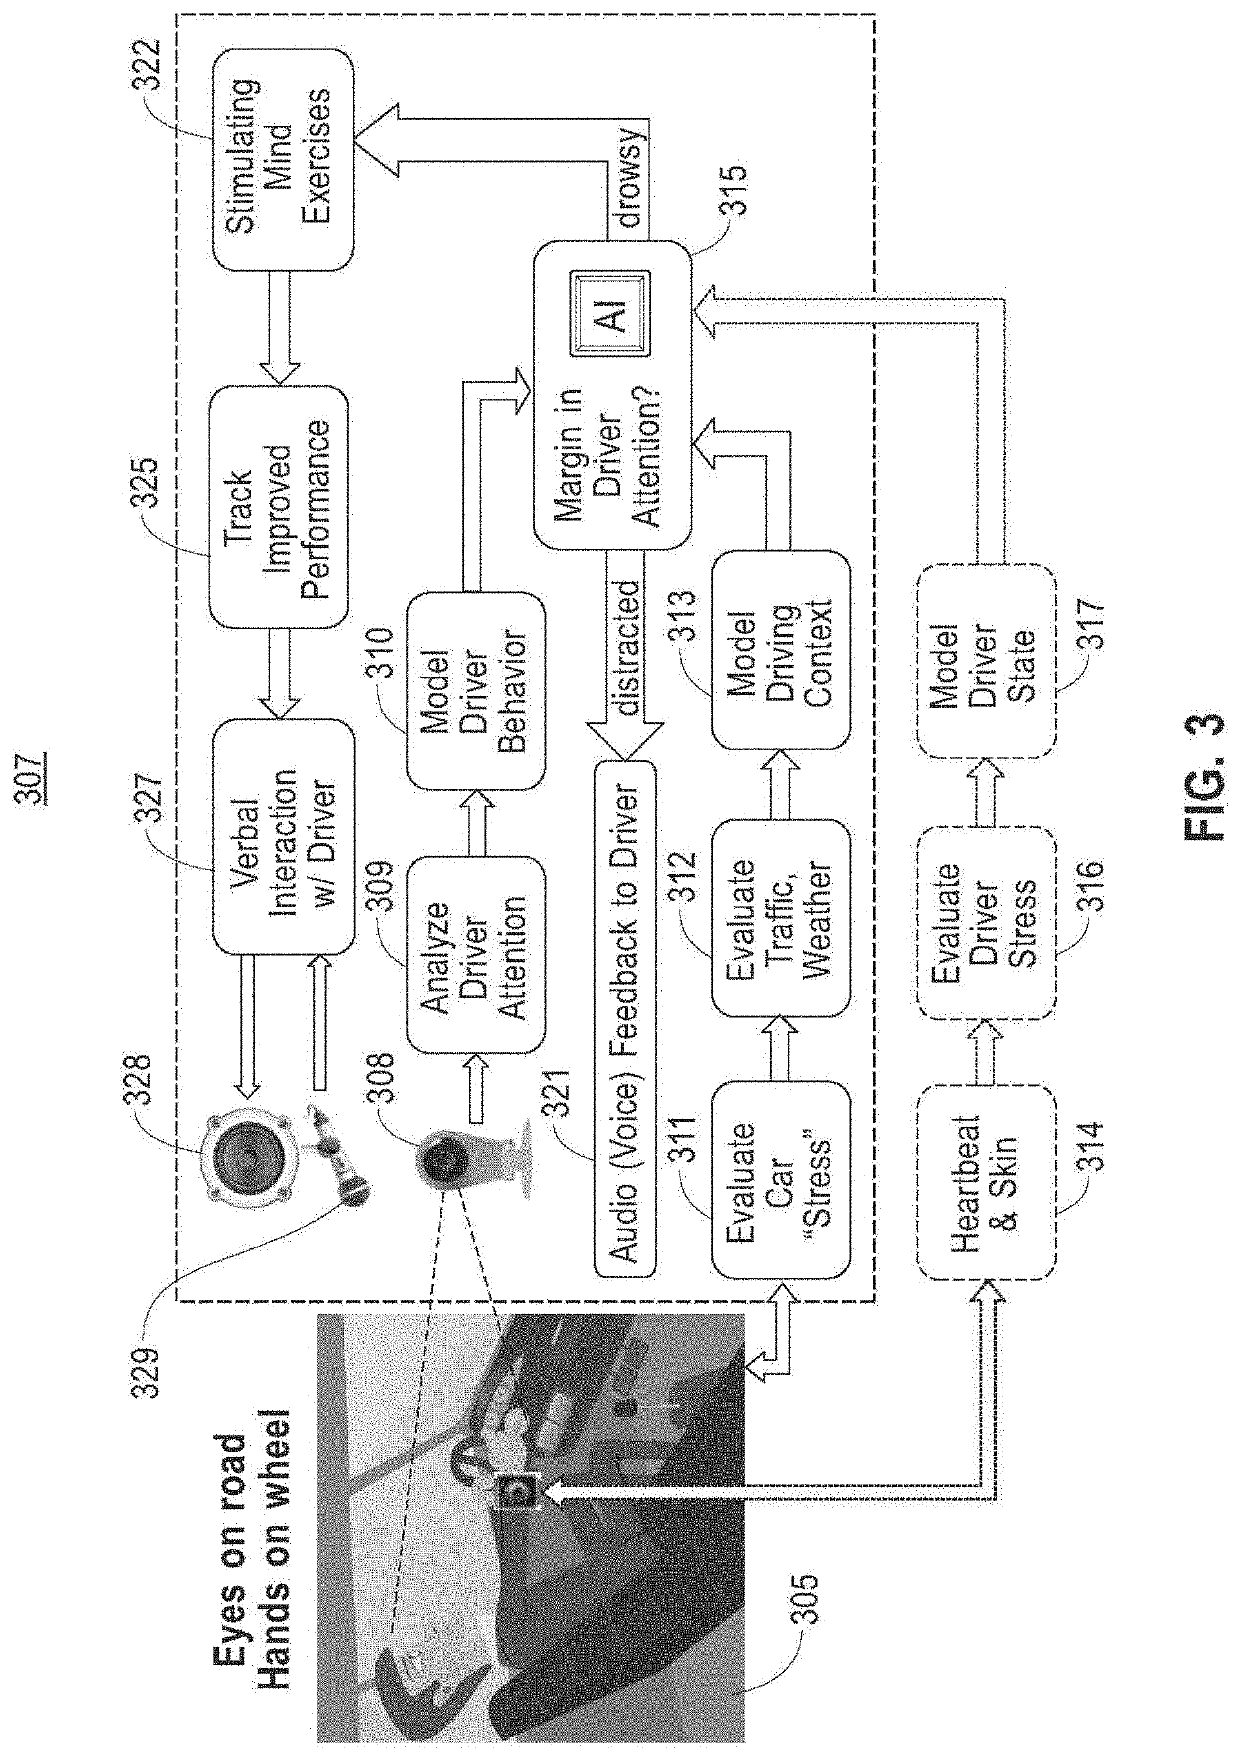 Methods and systems for using artificial intelligence to evaluate, correct, and monitor user attentiveness